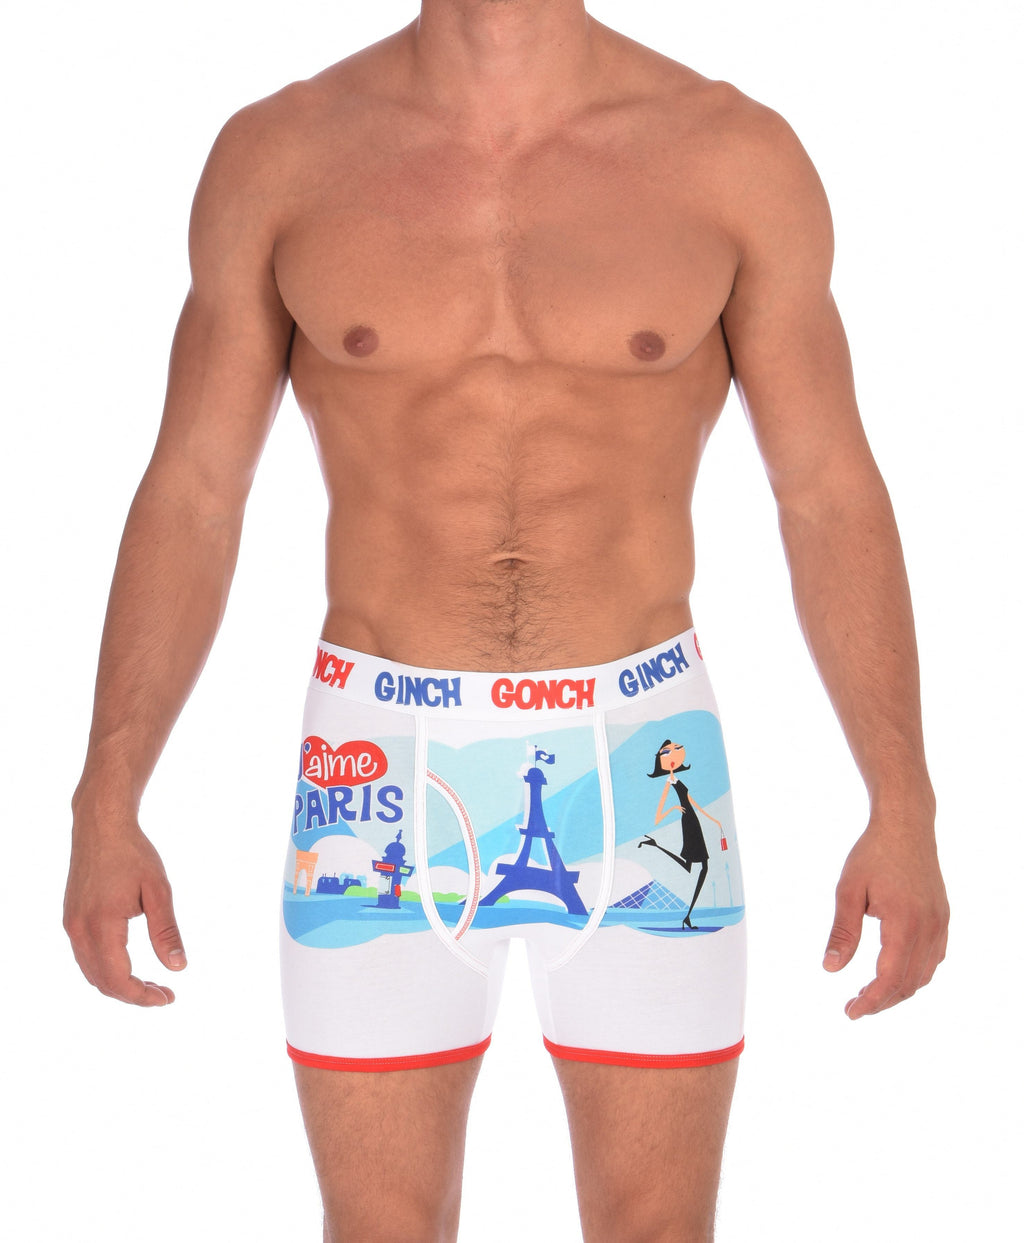 GG Ginch Gonch I Love Paris Boxer Brief - Men's Underwear white fabric with scene of eiffel tower and french person red and white trim and white printed waistband front